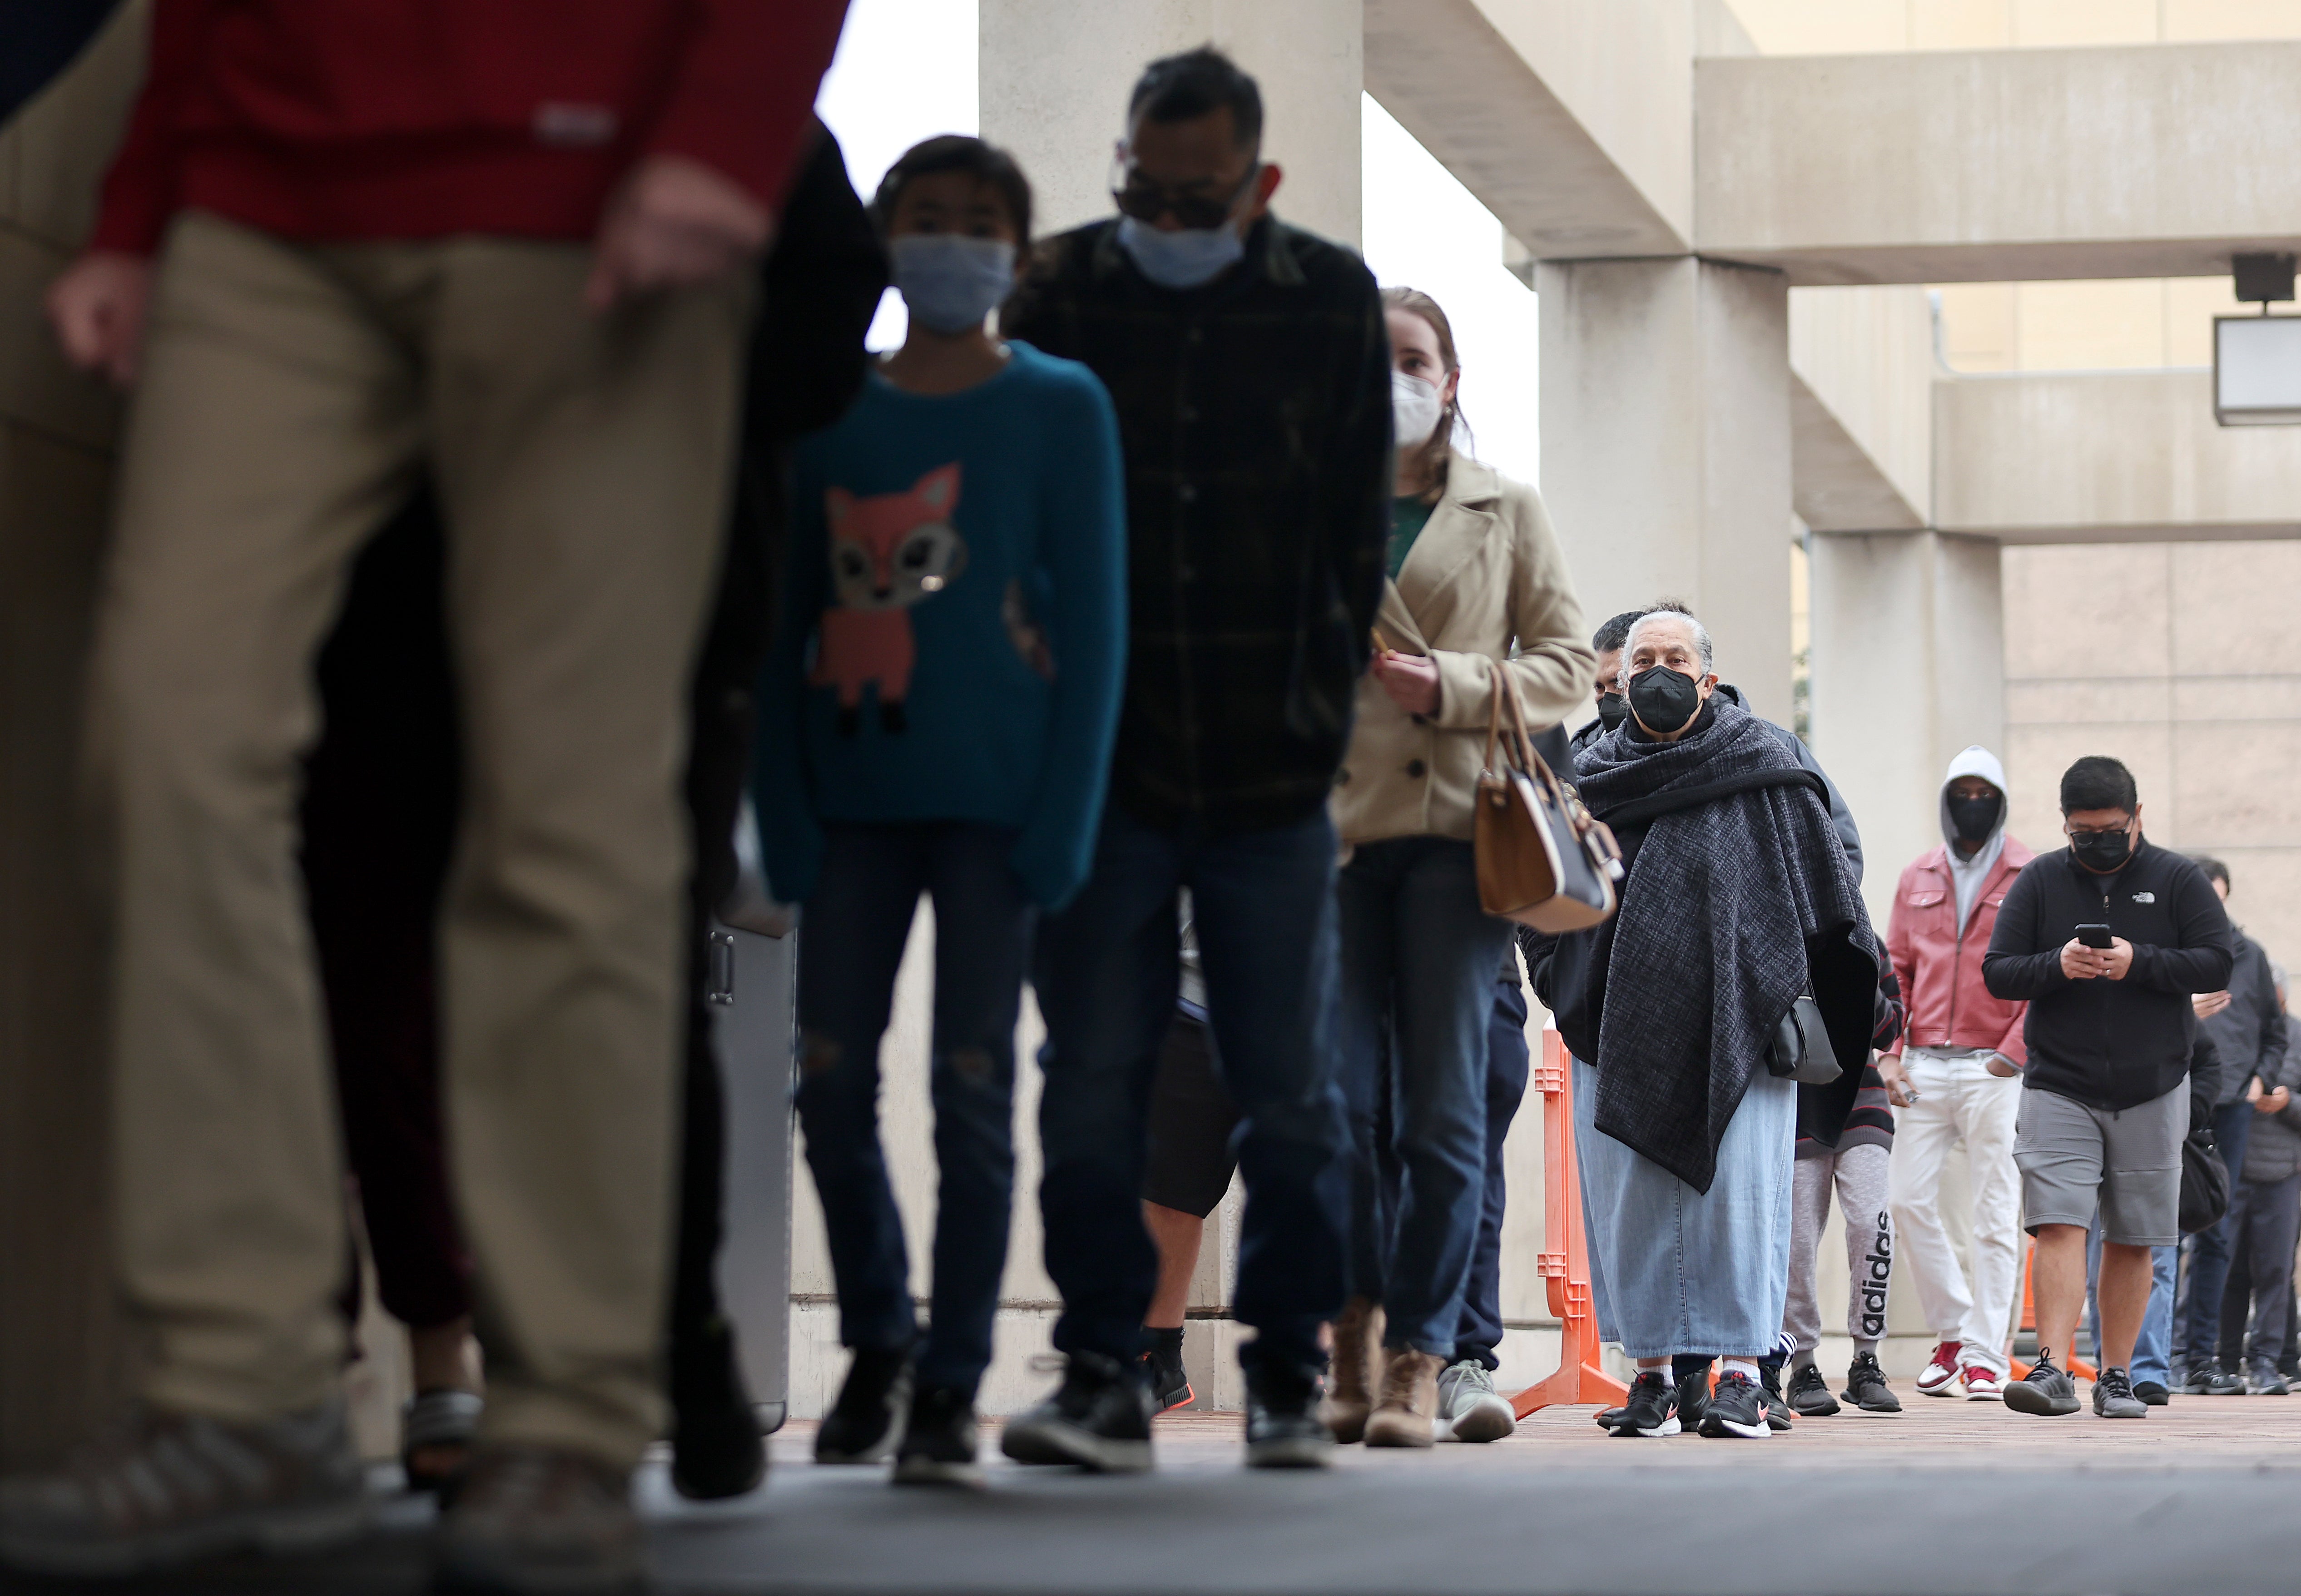 People wait in line to be tested for Covid-19 at Union Station on 7 January 2022 in Los Angeles, California